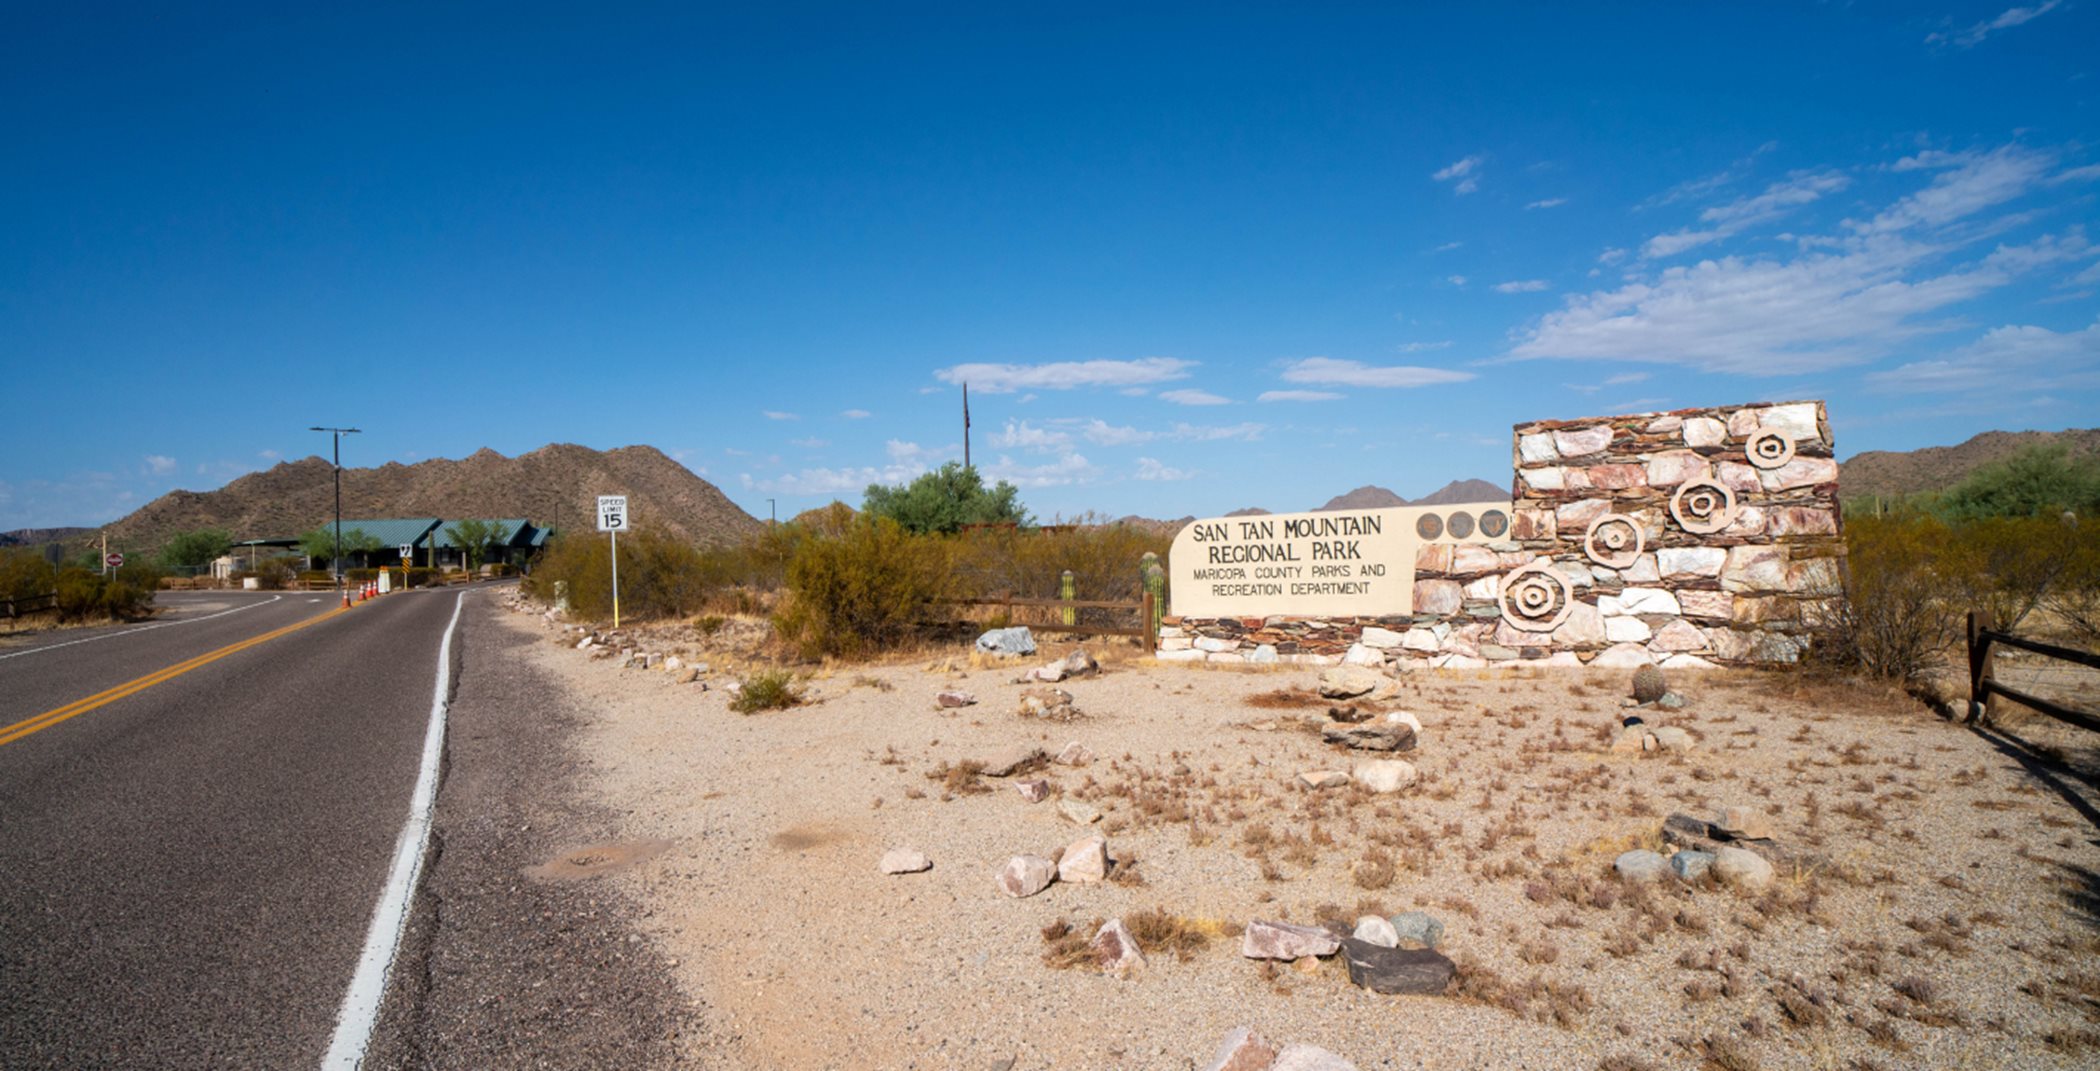 Entry Monument and road in the San Tan Mountain Regional Park